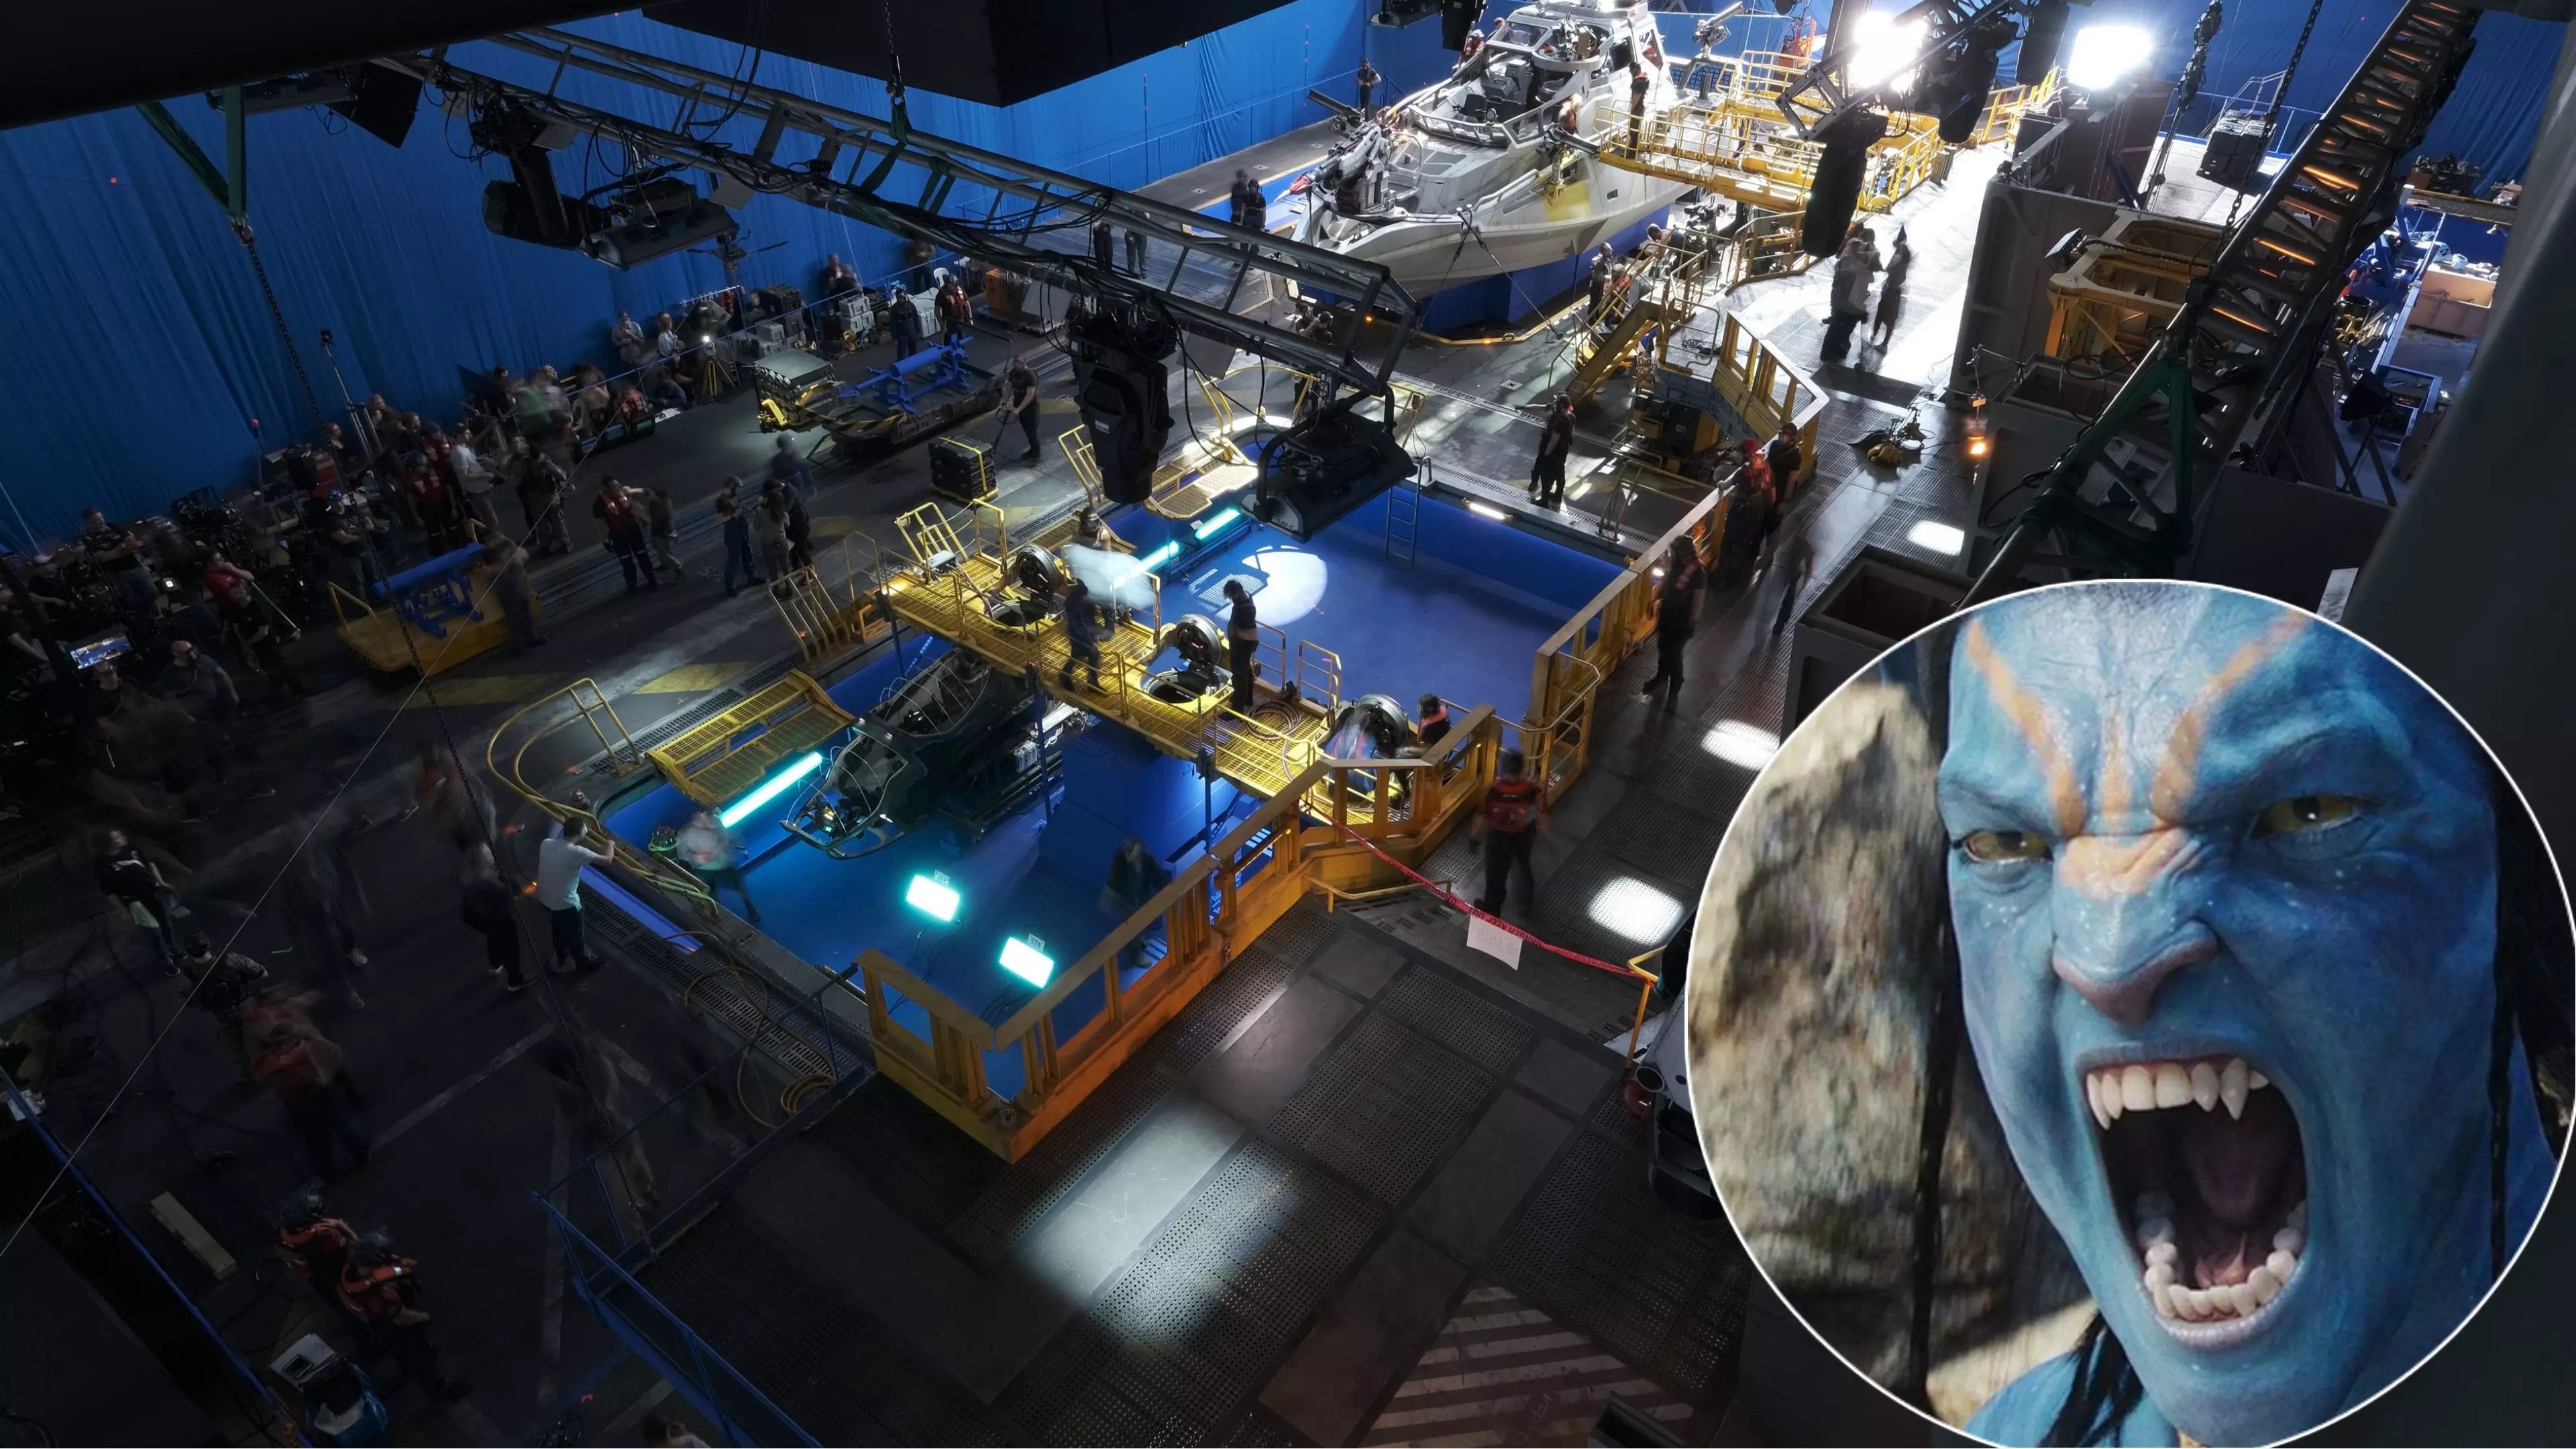 Avatar Marks End Of This Year's Live Action Filming With Sneak Peek Snap